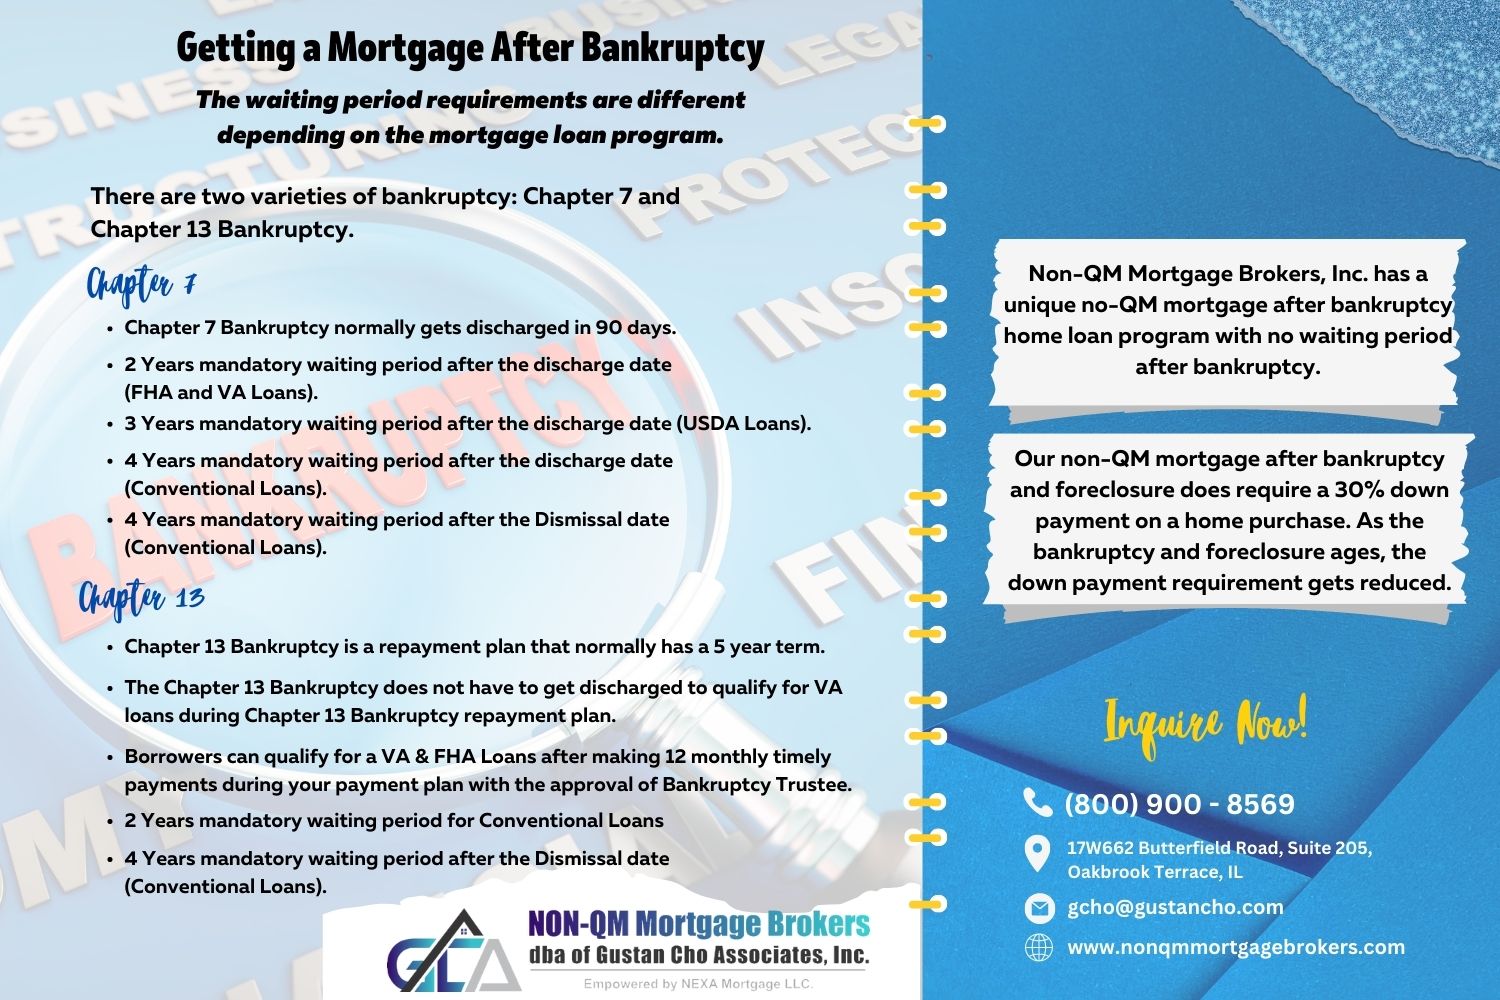 Mortgage After Bankruptcy